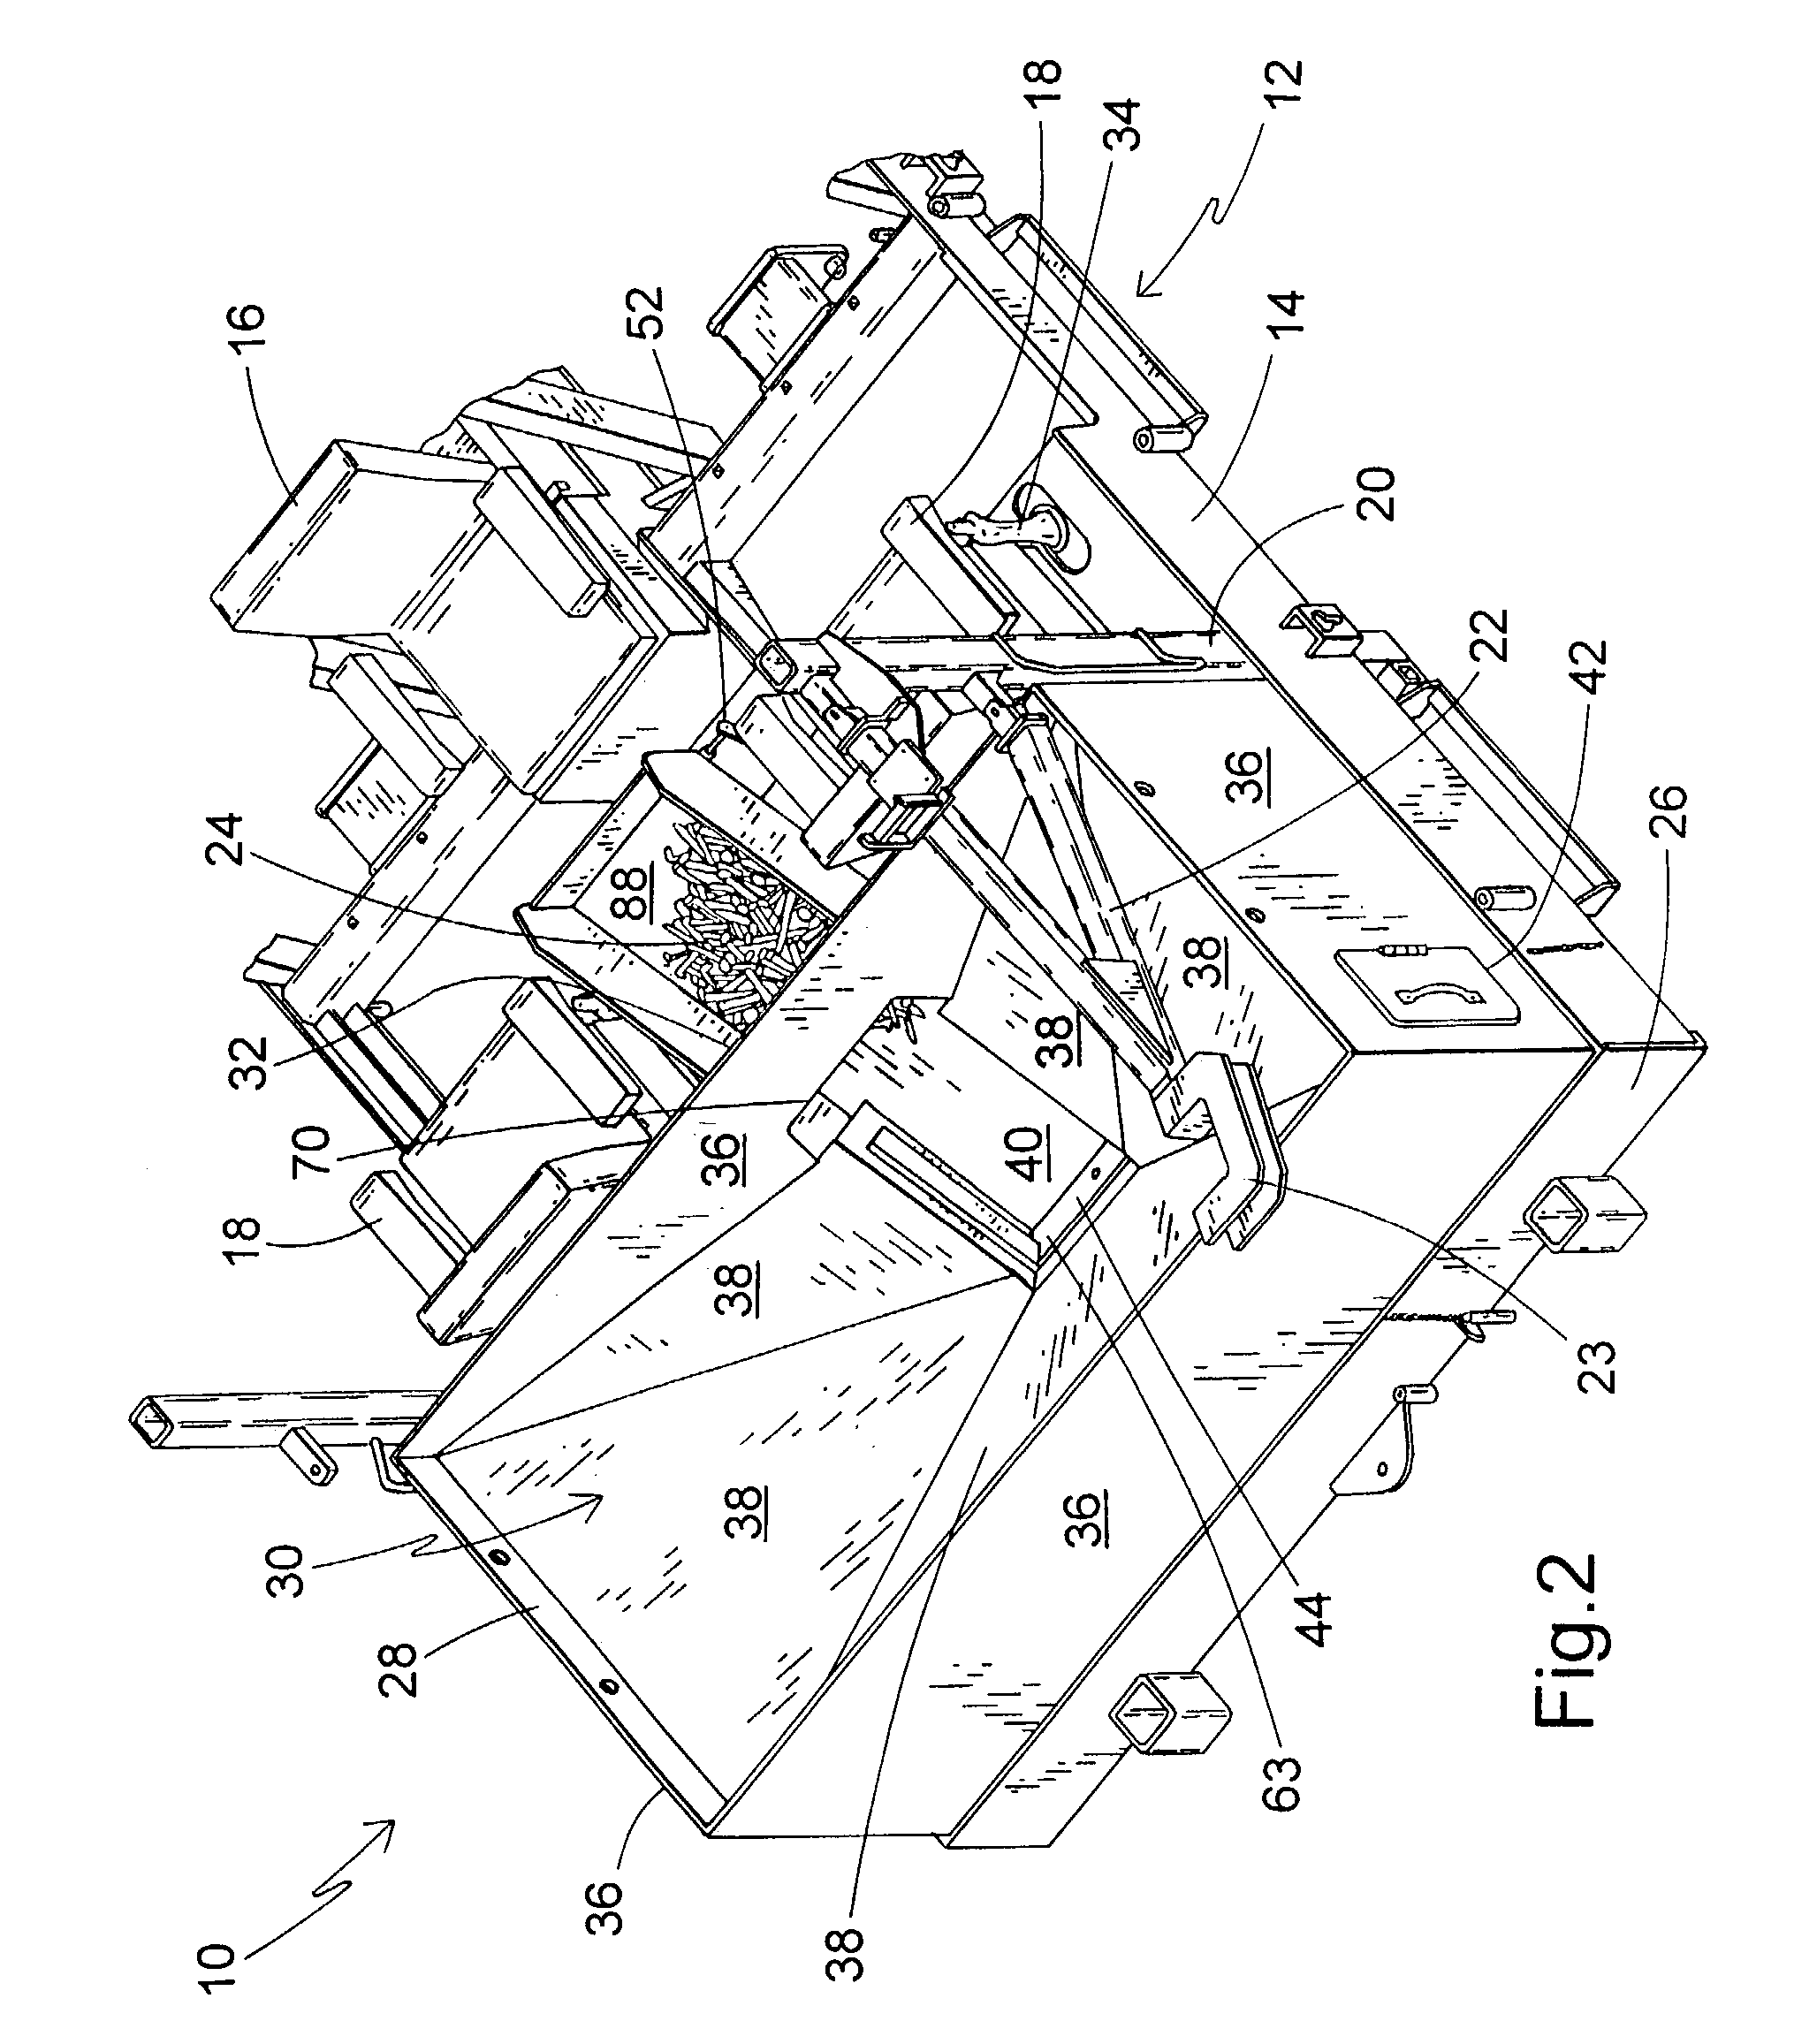 Bulk loader for conveying articles